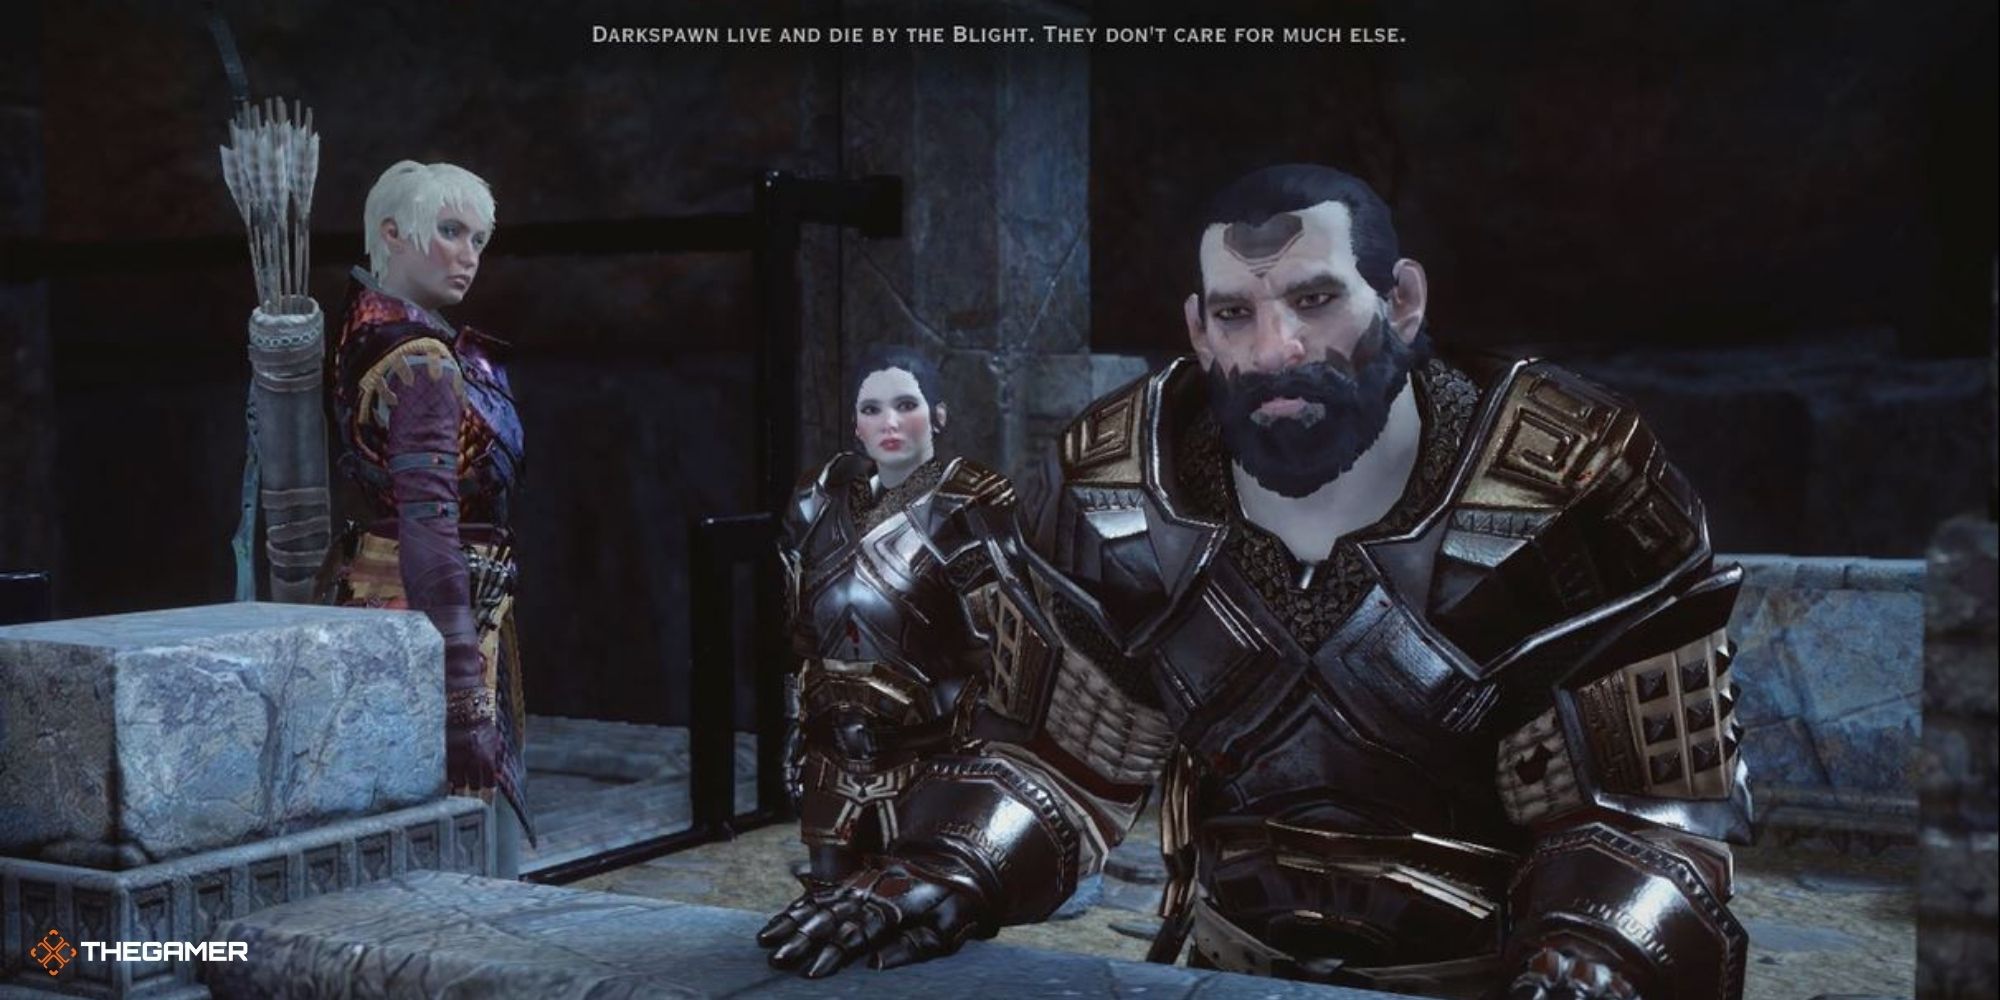 Dragon Age Inquisition - Member of the Legion of the Dead talks about the Darkspawn